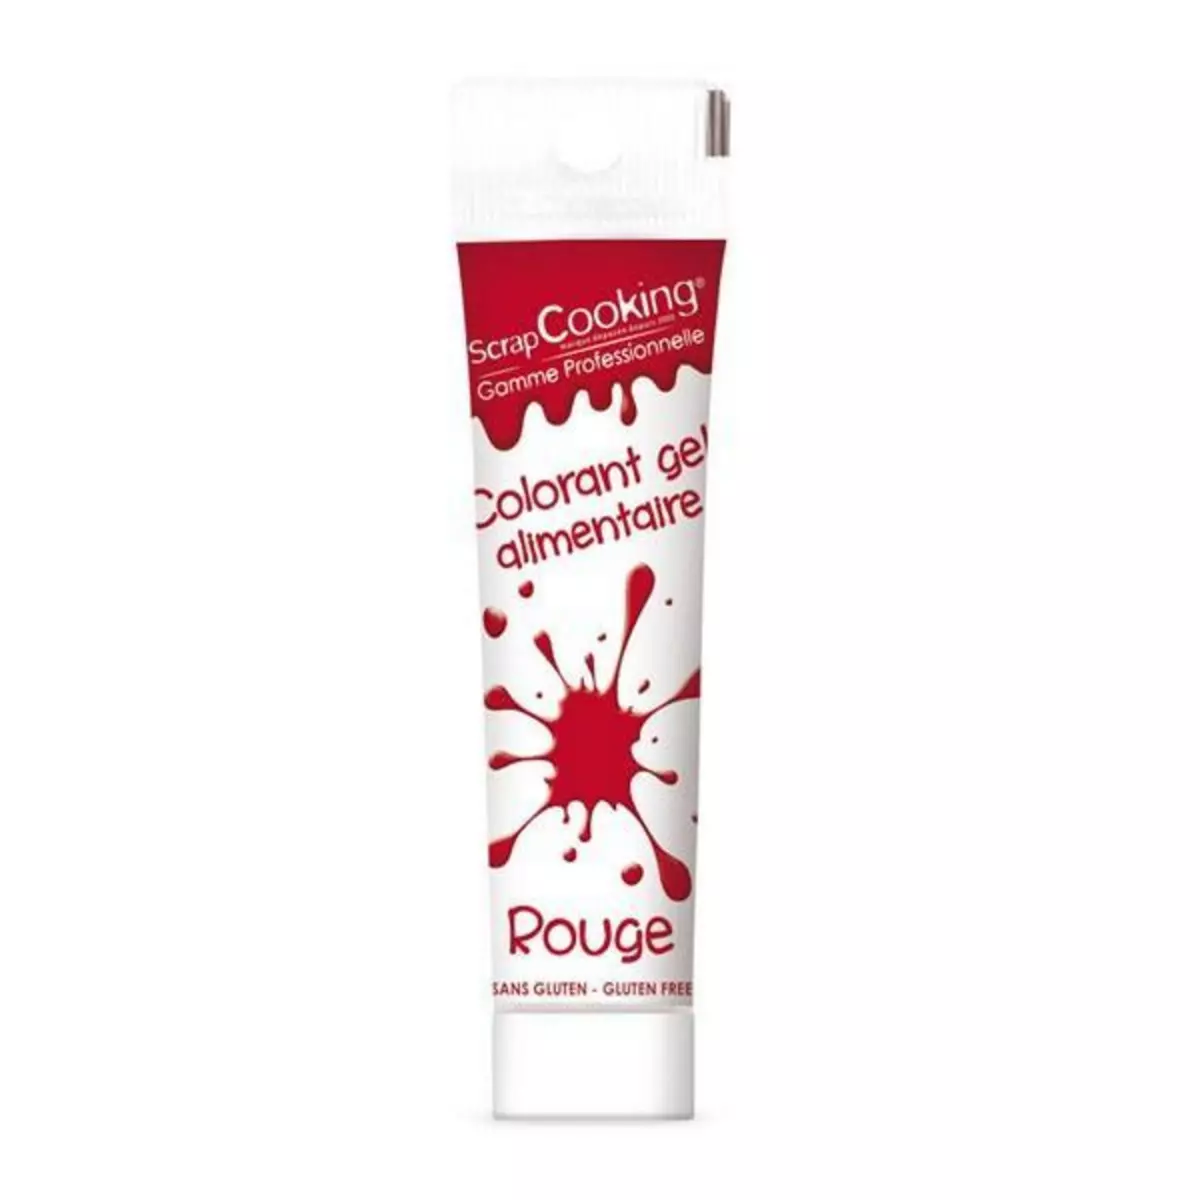 SCRAPCOOKING Gel colorant alimentaire rouge 20 g